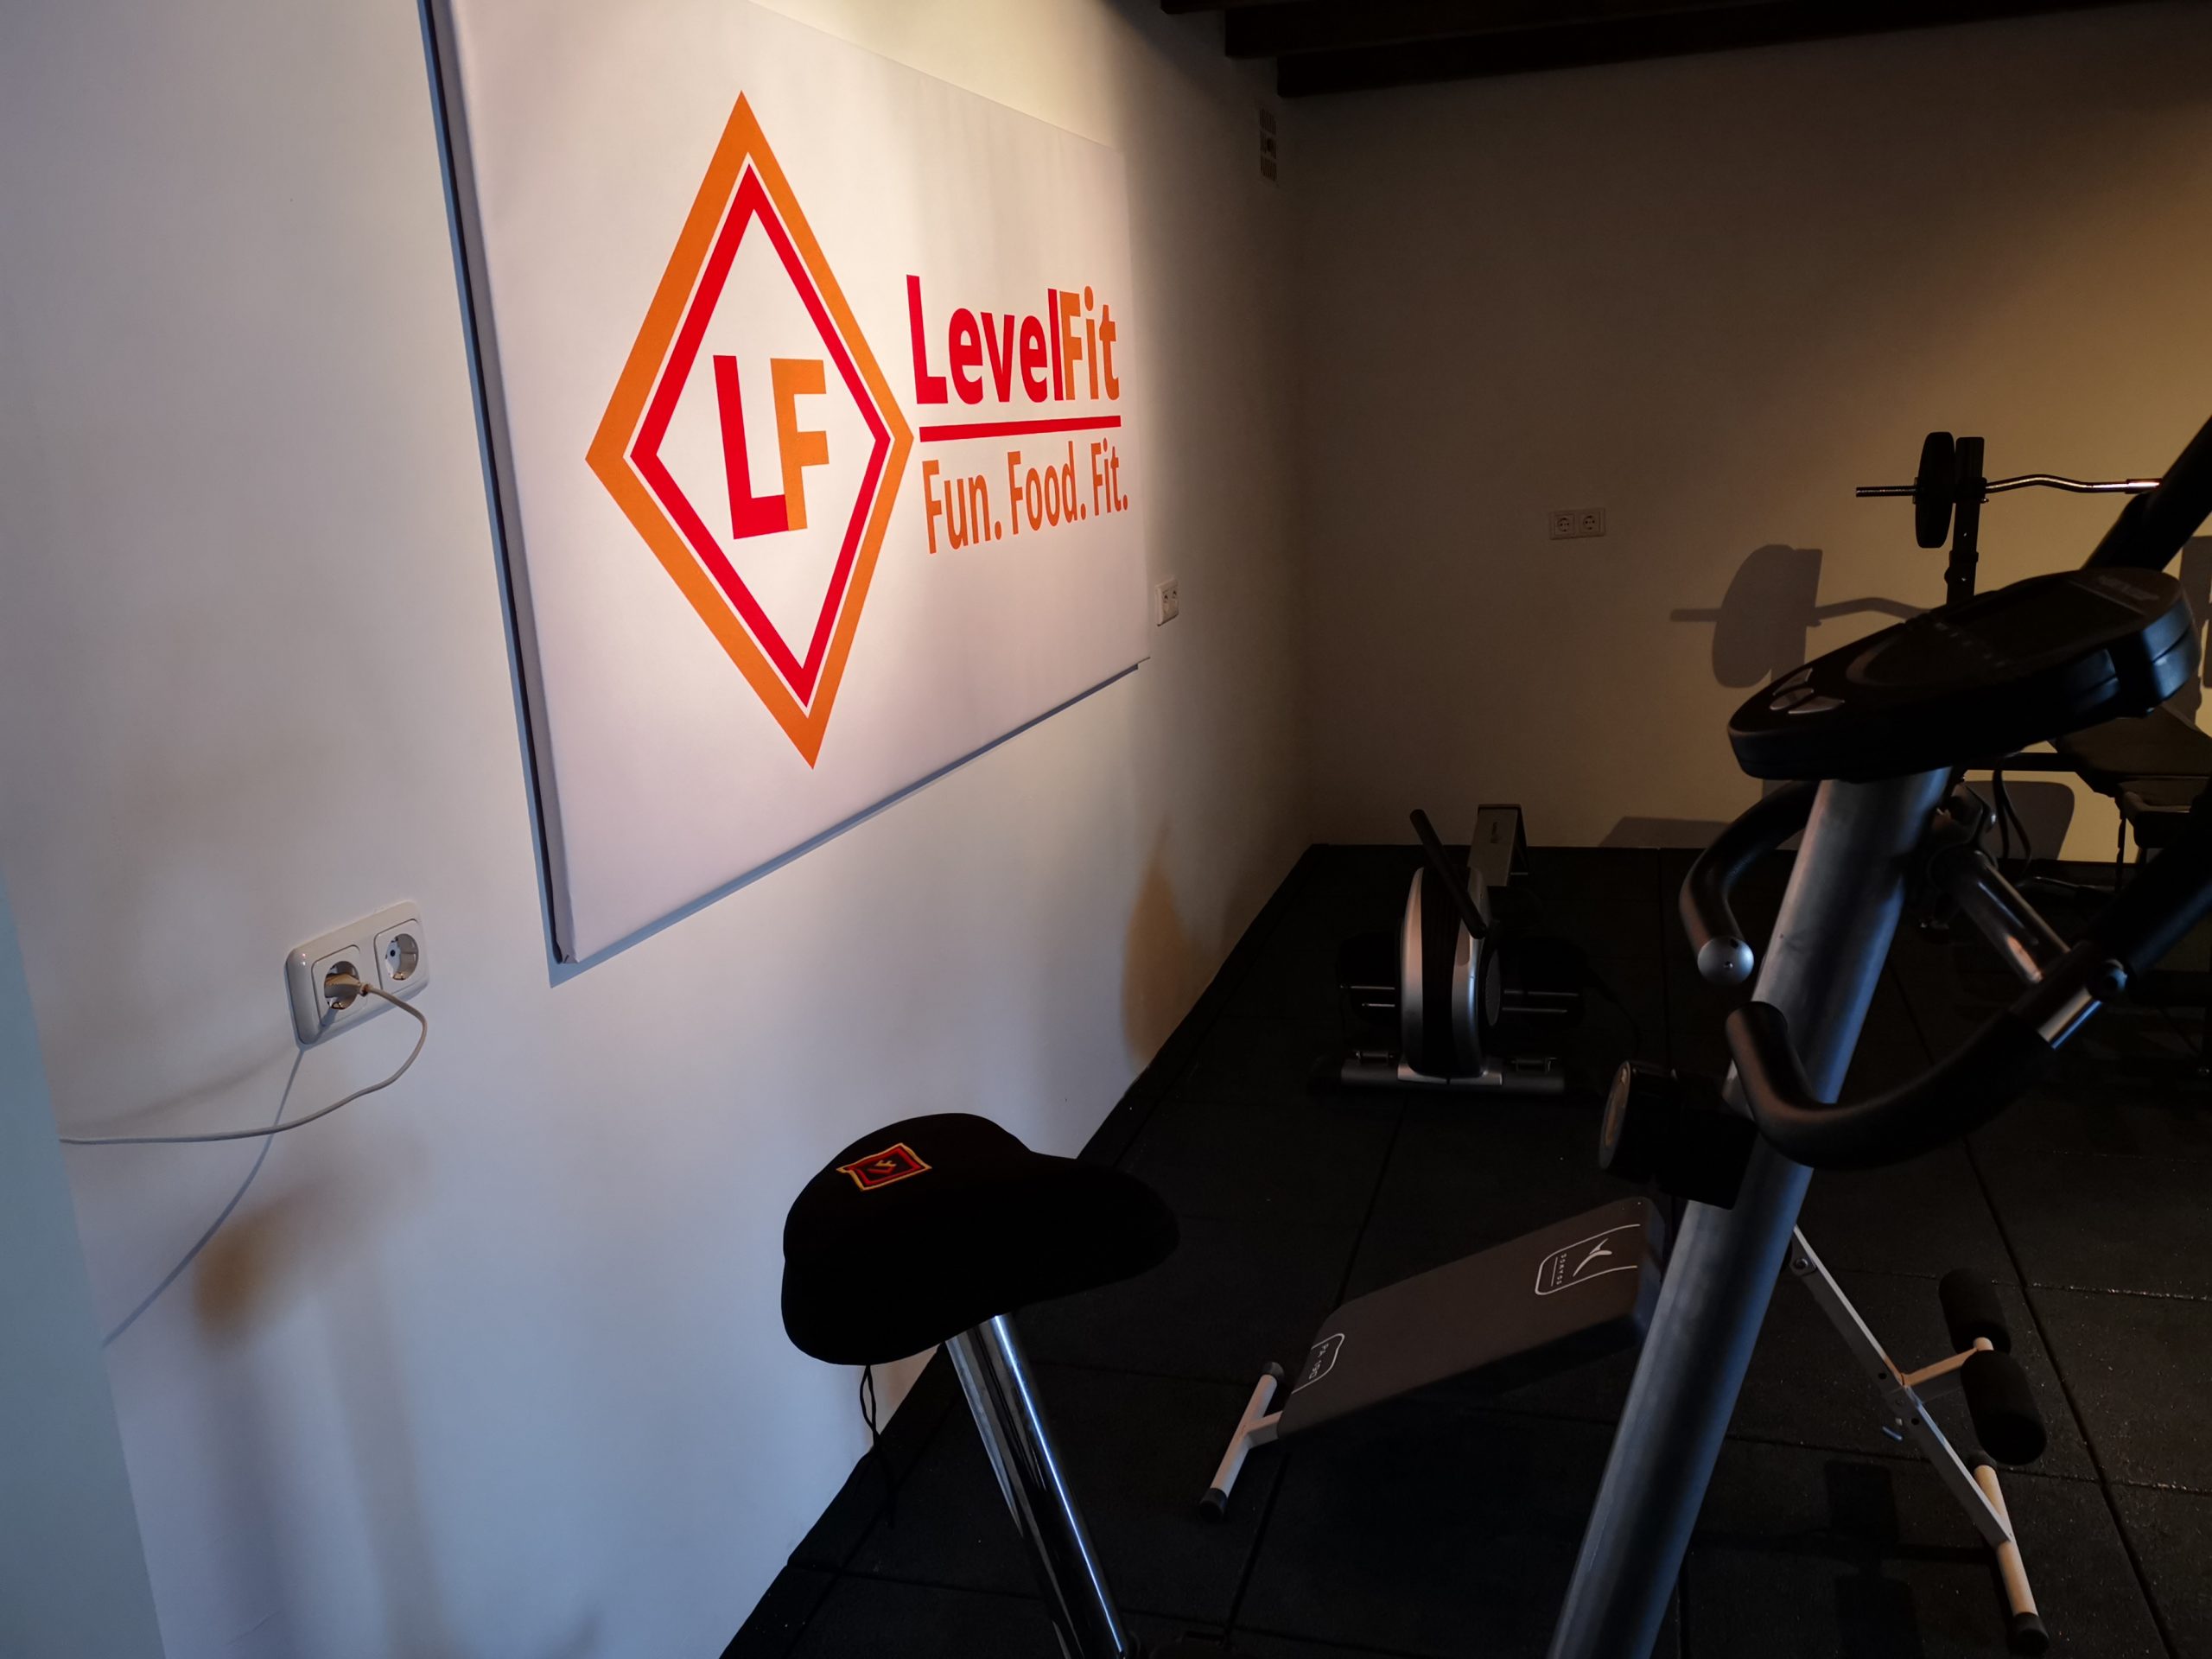 Personal trainer Enschede